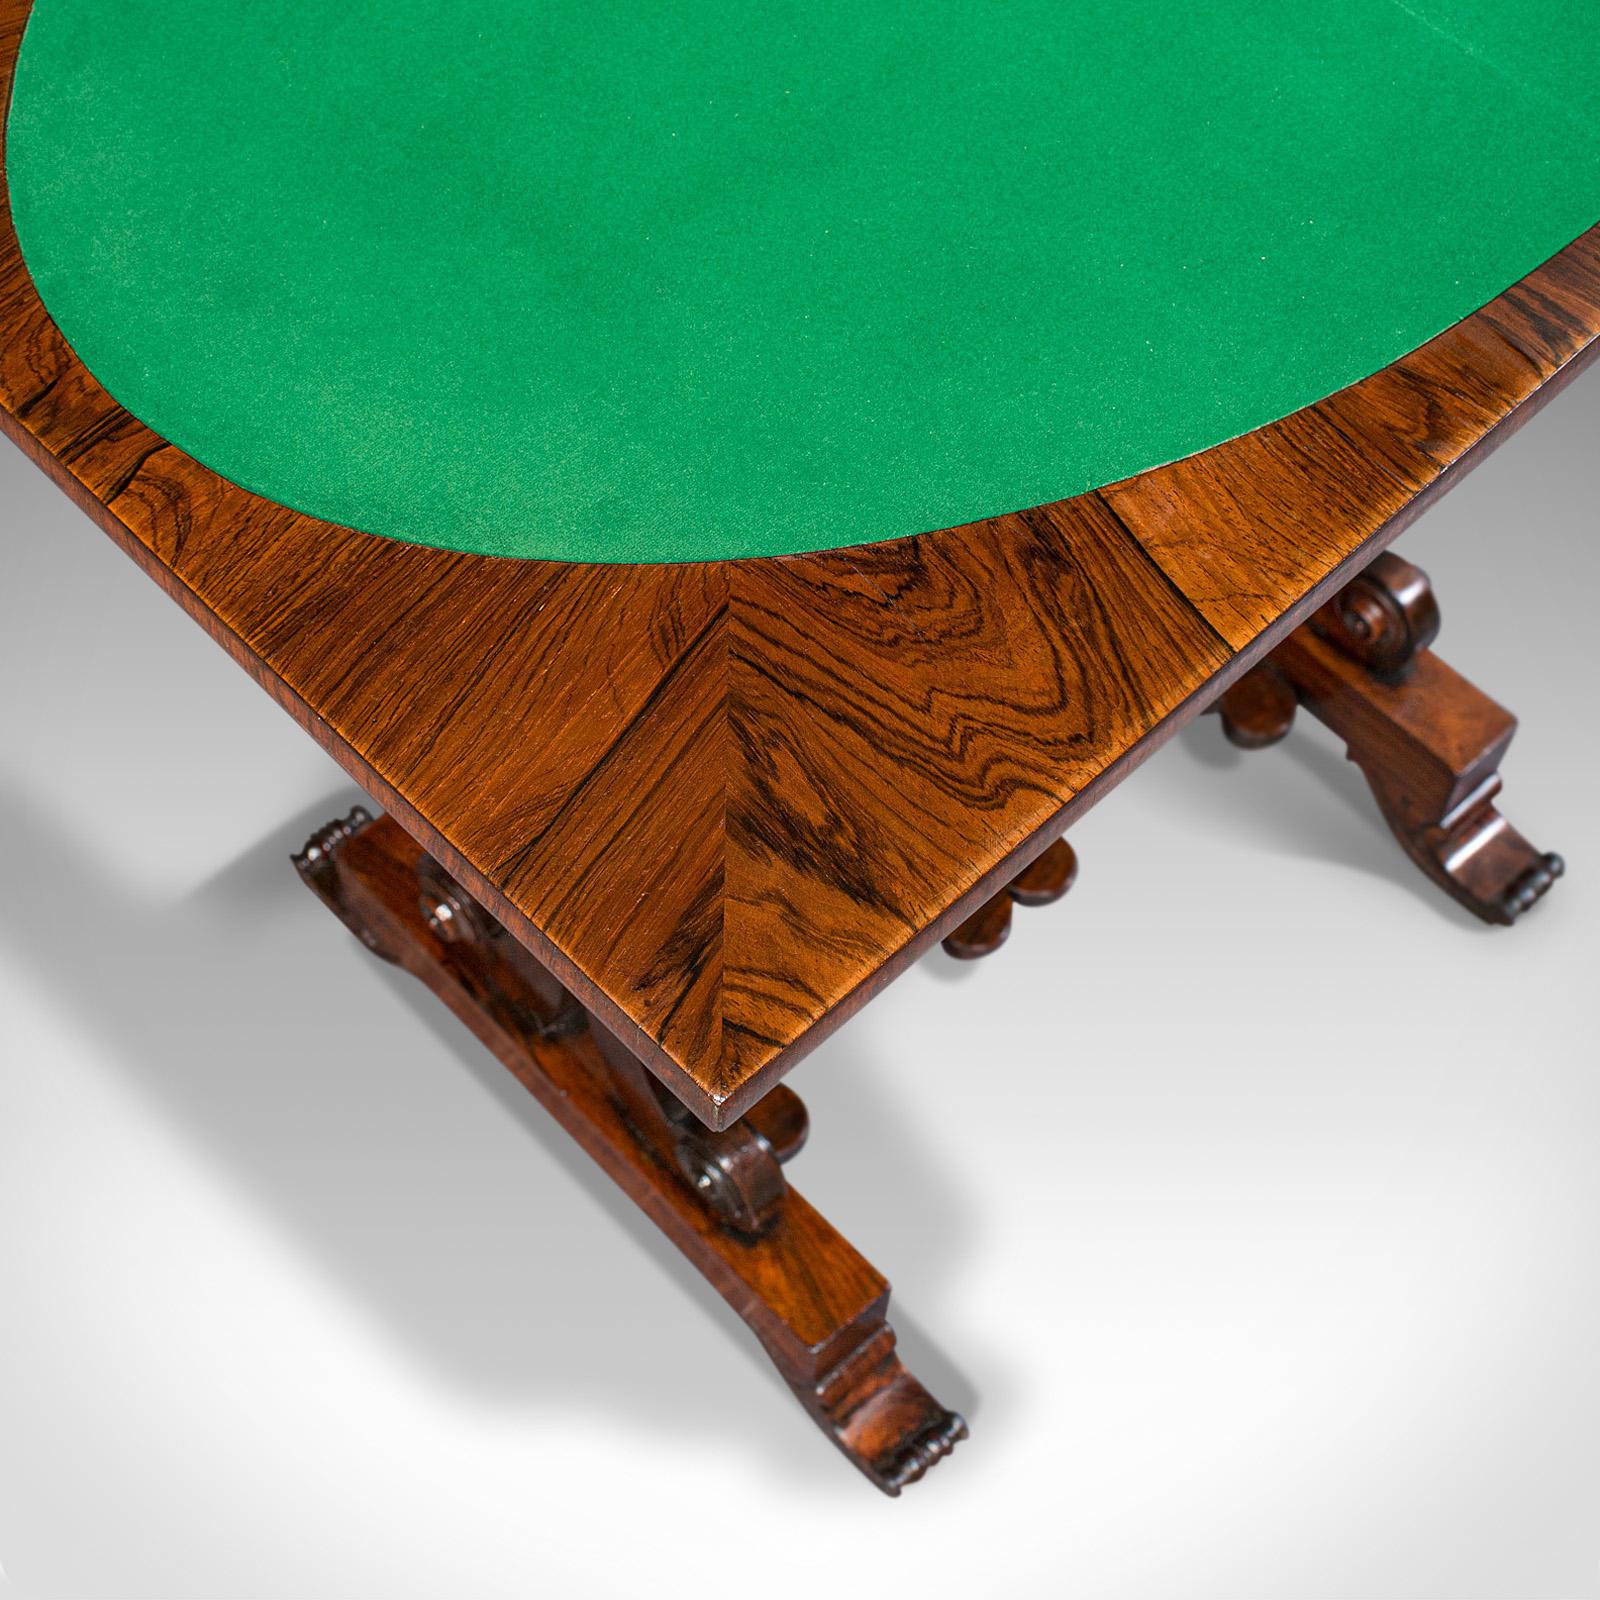 Antique Fold Over Games Table, English, Rosewood, Chess, Cards, Regency, C.1820 For Sale 3